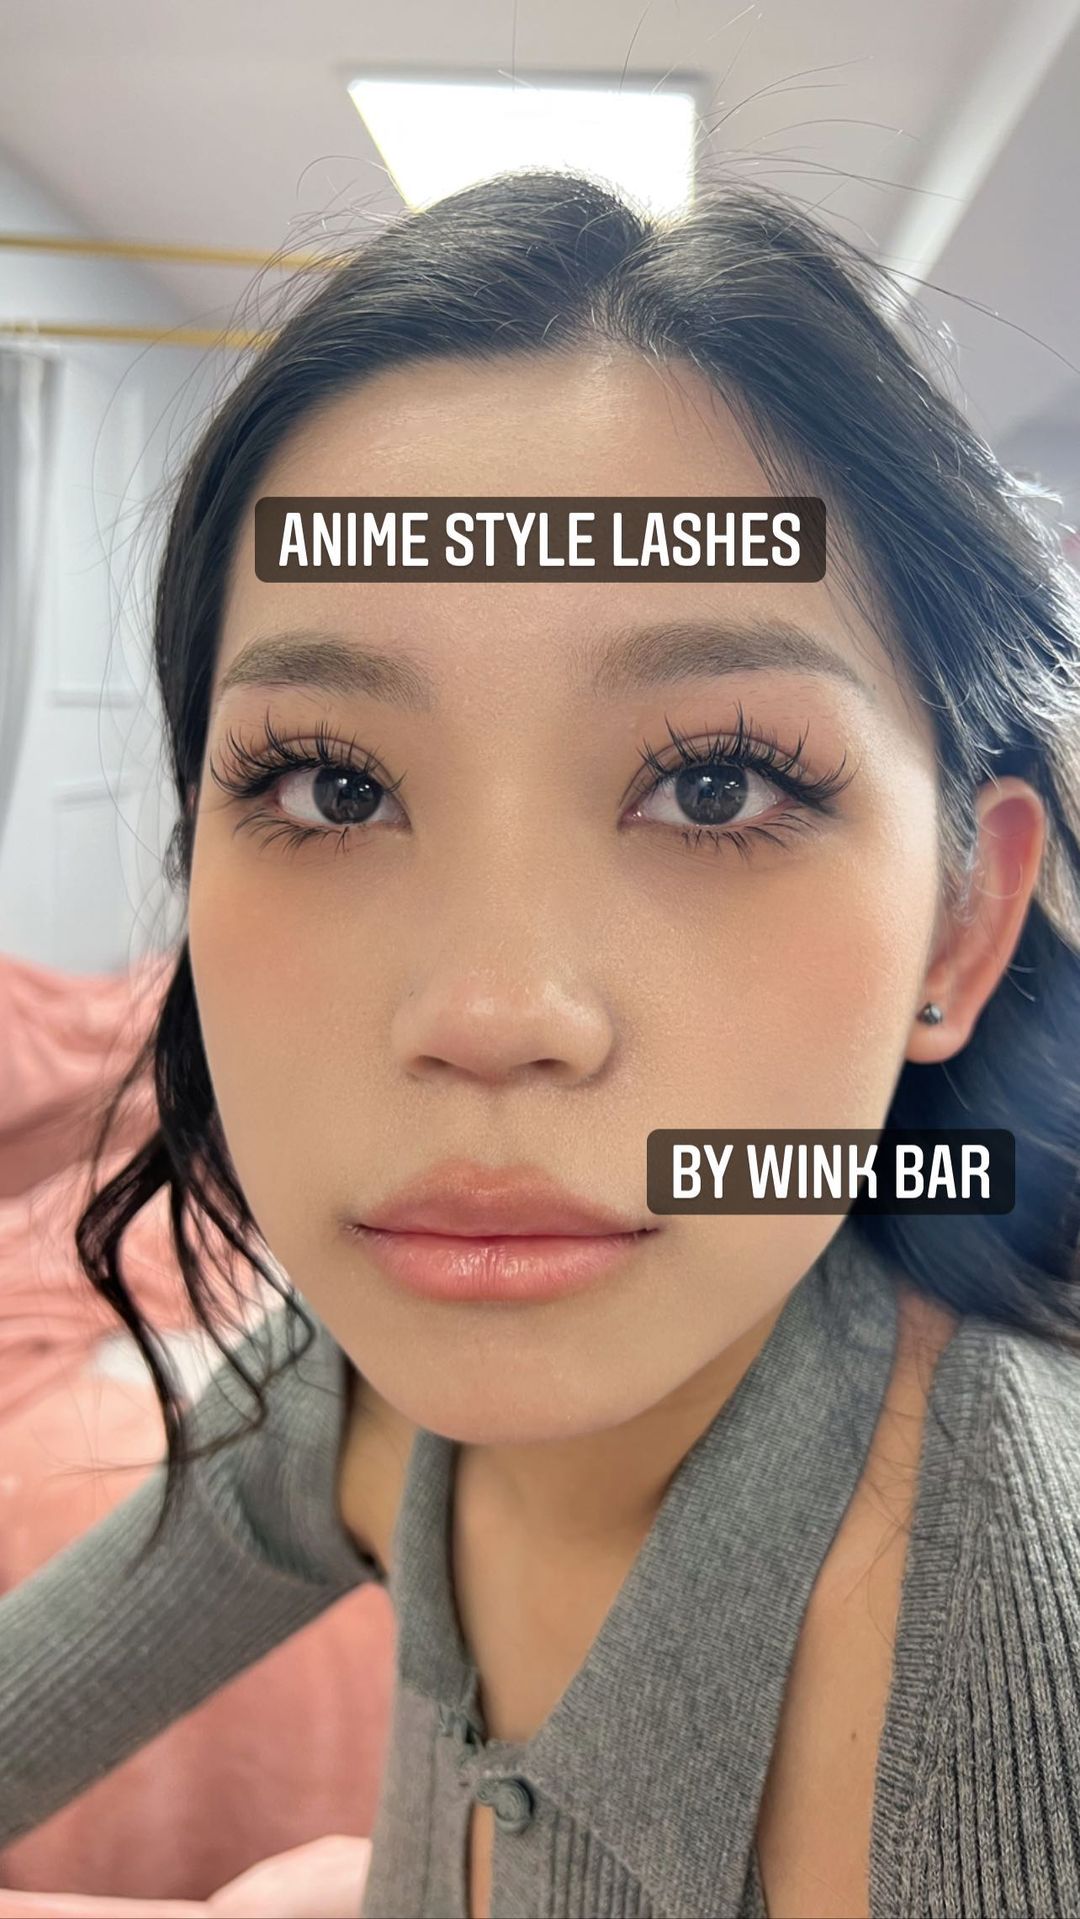 Wispy Lashes Vs Anime Lashes Which One Is Better